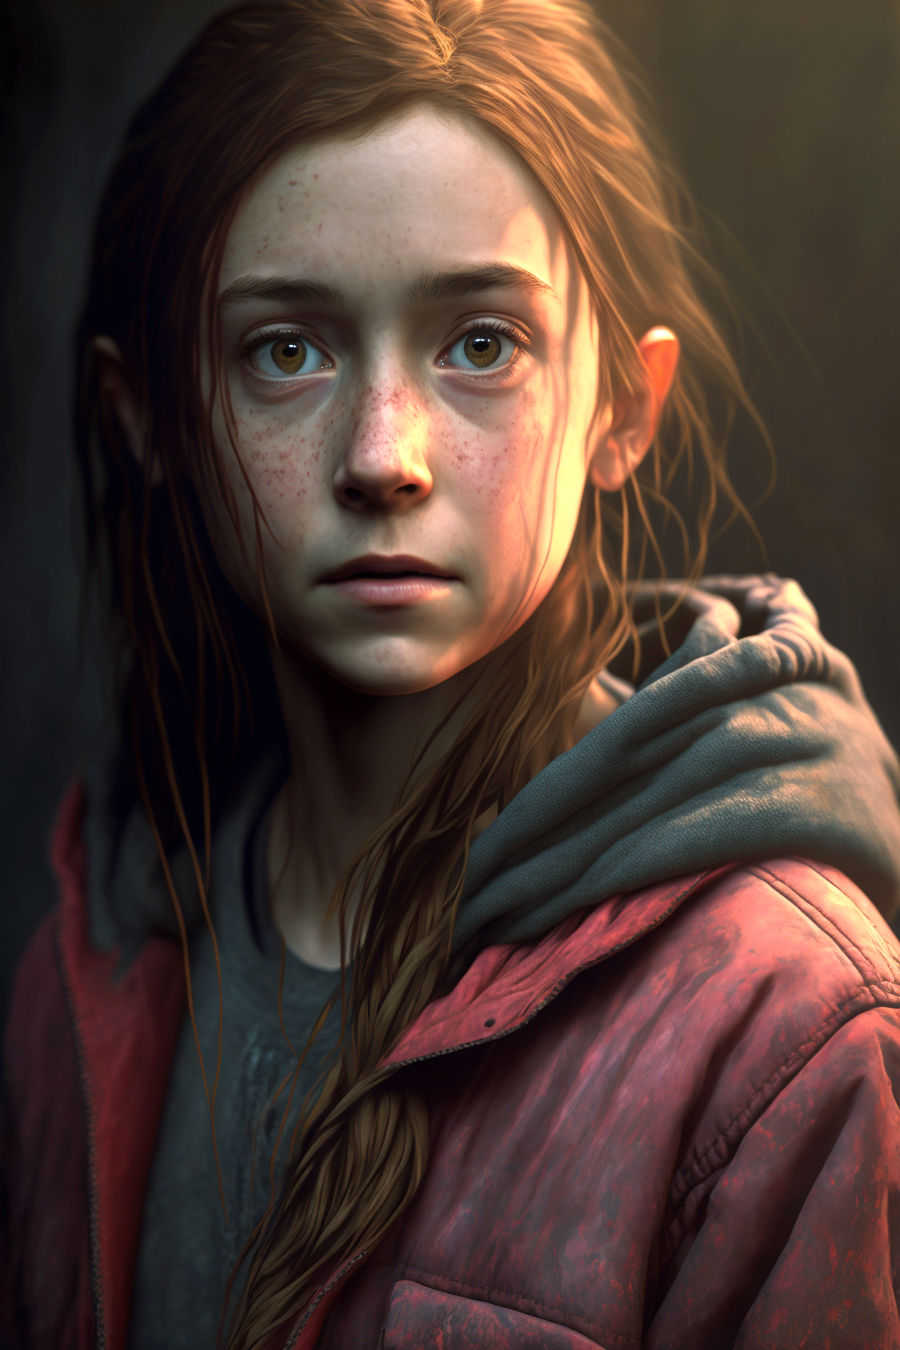 The Last of Us 2 - J.J, Ellie, and Abby by mikelshehata on DeviantArt